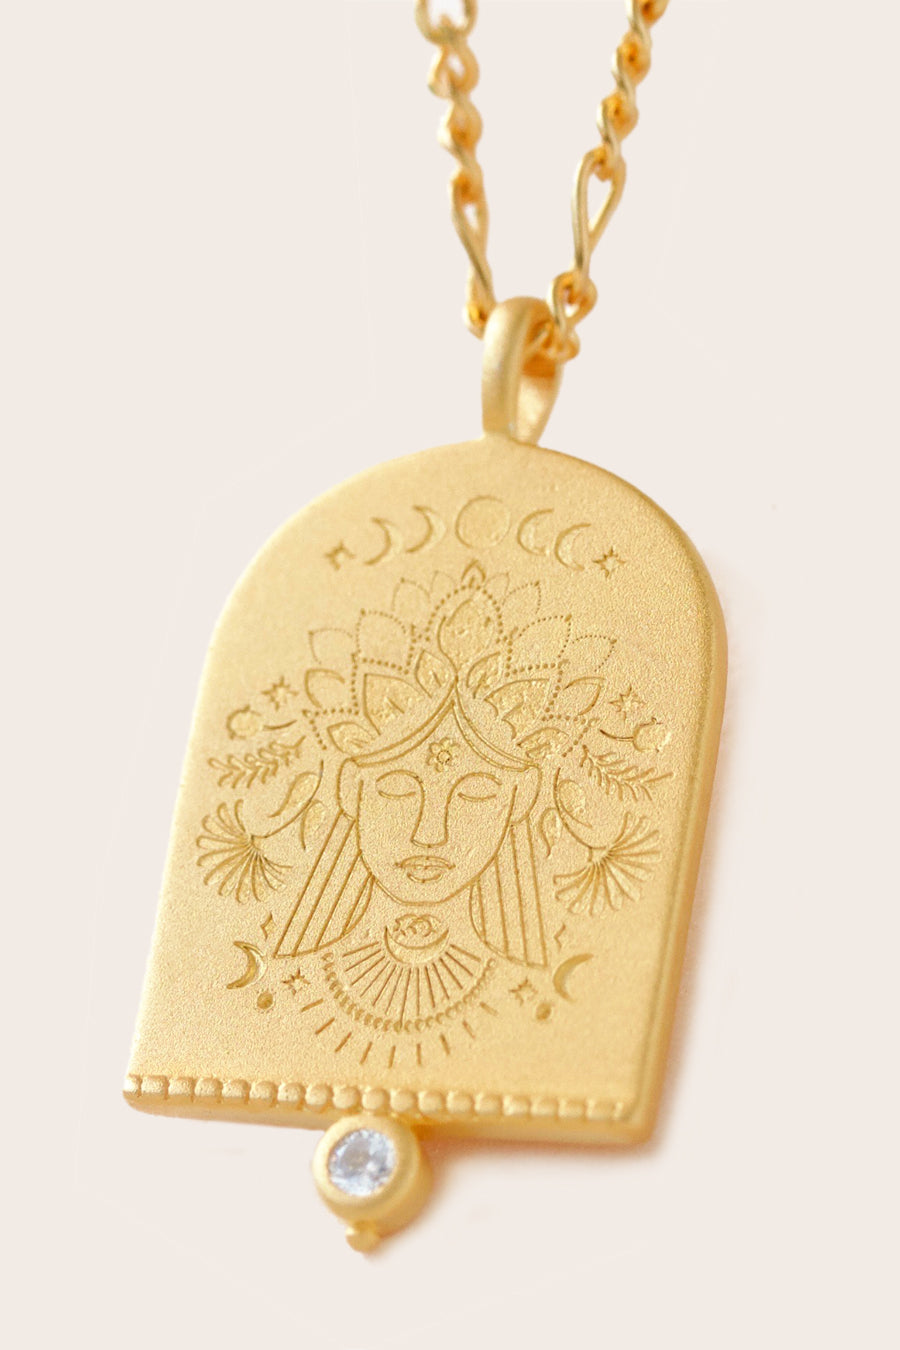 Virgo star sign zodiac astrology necklace in gold